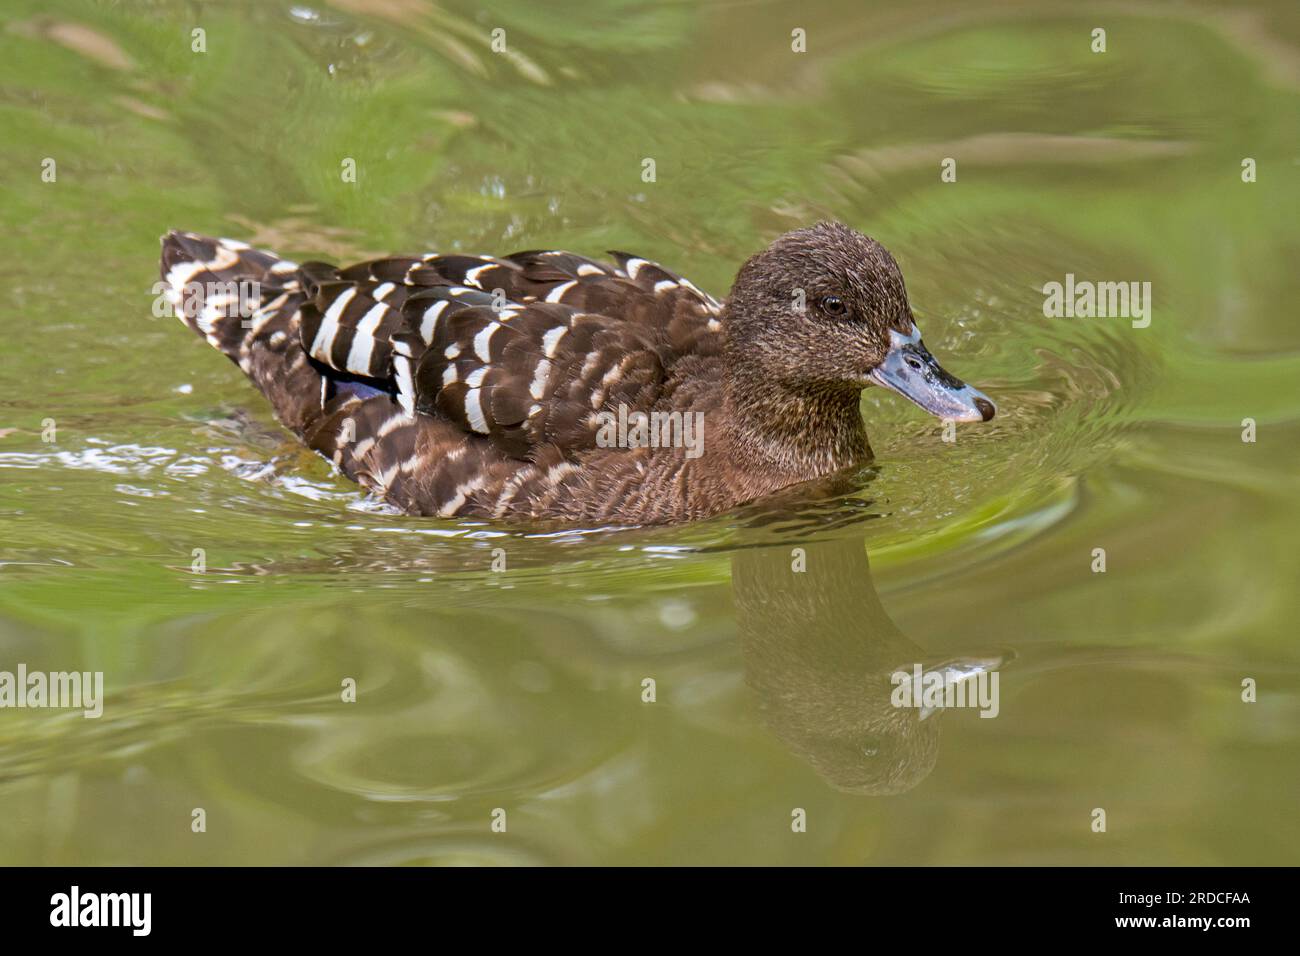 African black duck / black river duck (Anas sparsa) swimming in pond, native to central and southern Africa Stock Photo